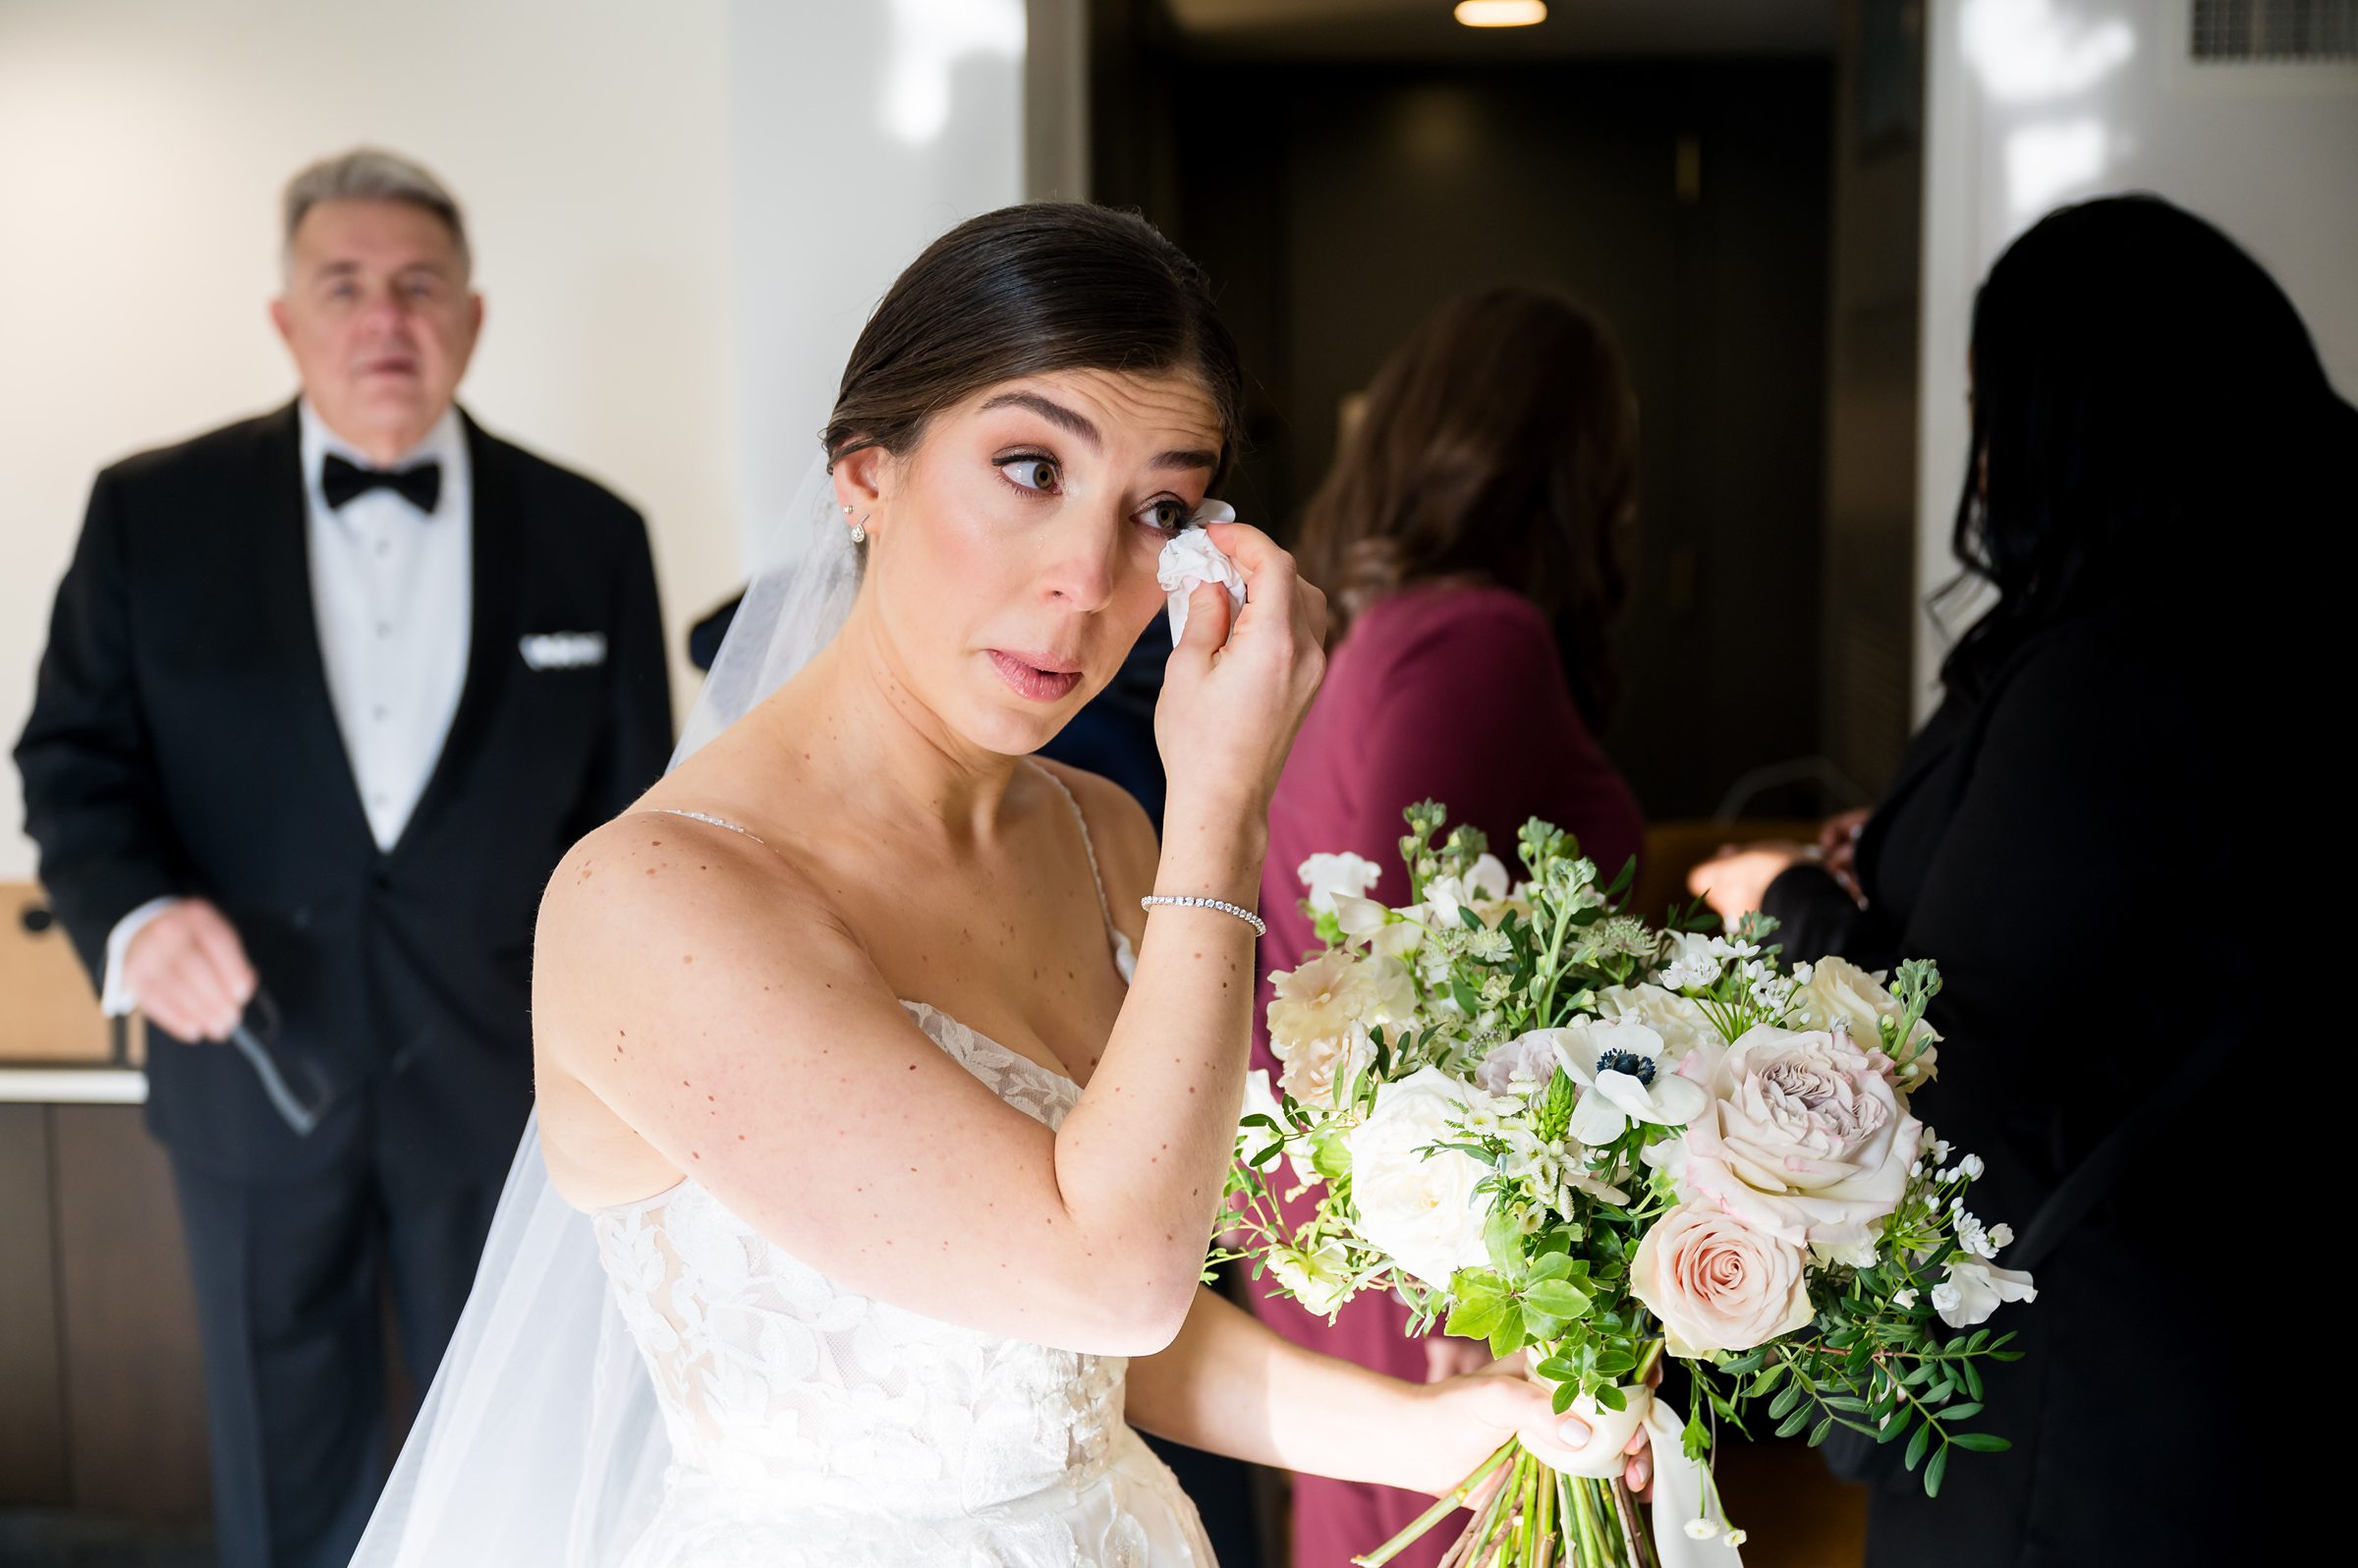 At a Lilah Events wedding, the bride gazes lovingly at her bouquet with the man standing behind her.